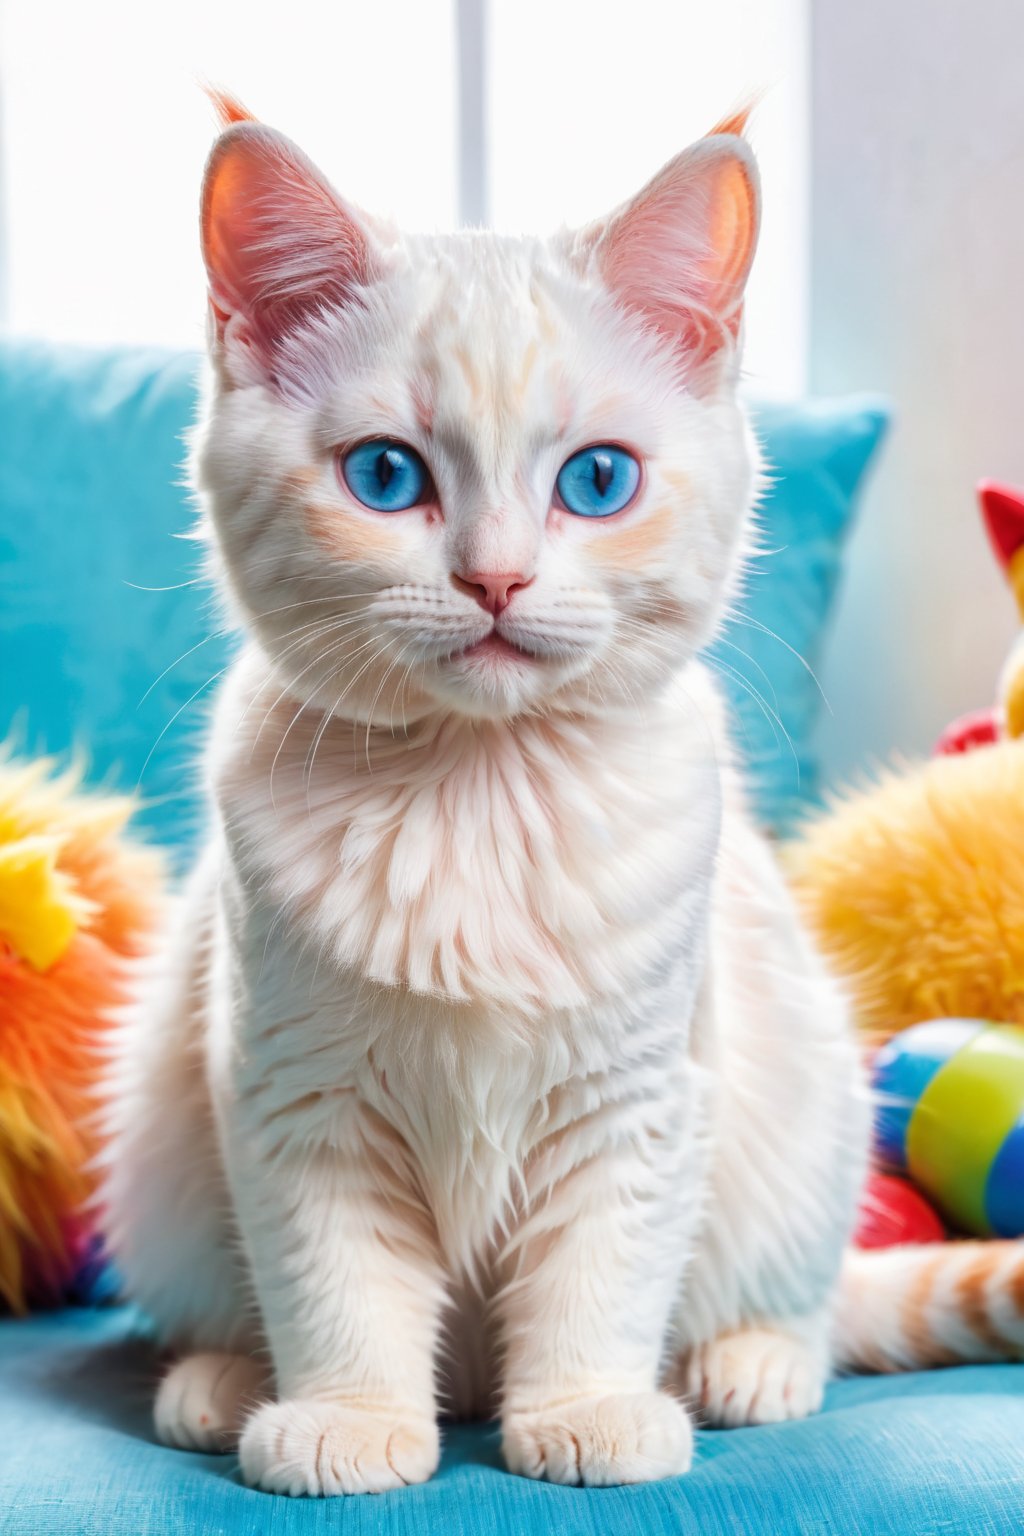 a cat with short fur, adorable blue eyes, and sharp claws, cut into a cute pose, sitting on a soft pillow, surrounded by colorful toys, in a cozy indoor setting, with natural lighting emphasizing its playful expression. The artwork should be a high-resolution masterpiece, capturing the realistic details of the cat's fur and vibrant colors of the toys. The style should be a combination of photography and concept art, with a warm and vivid color tone.